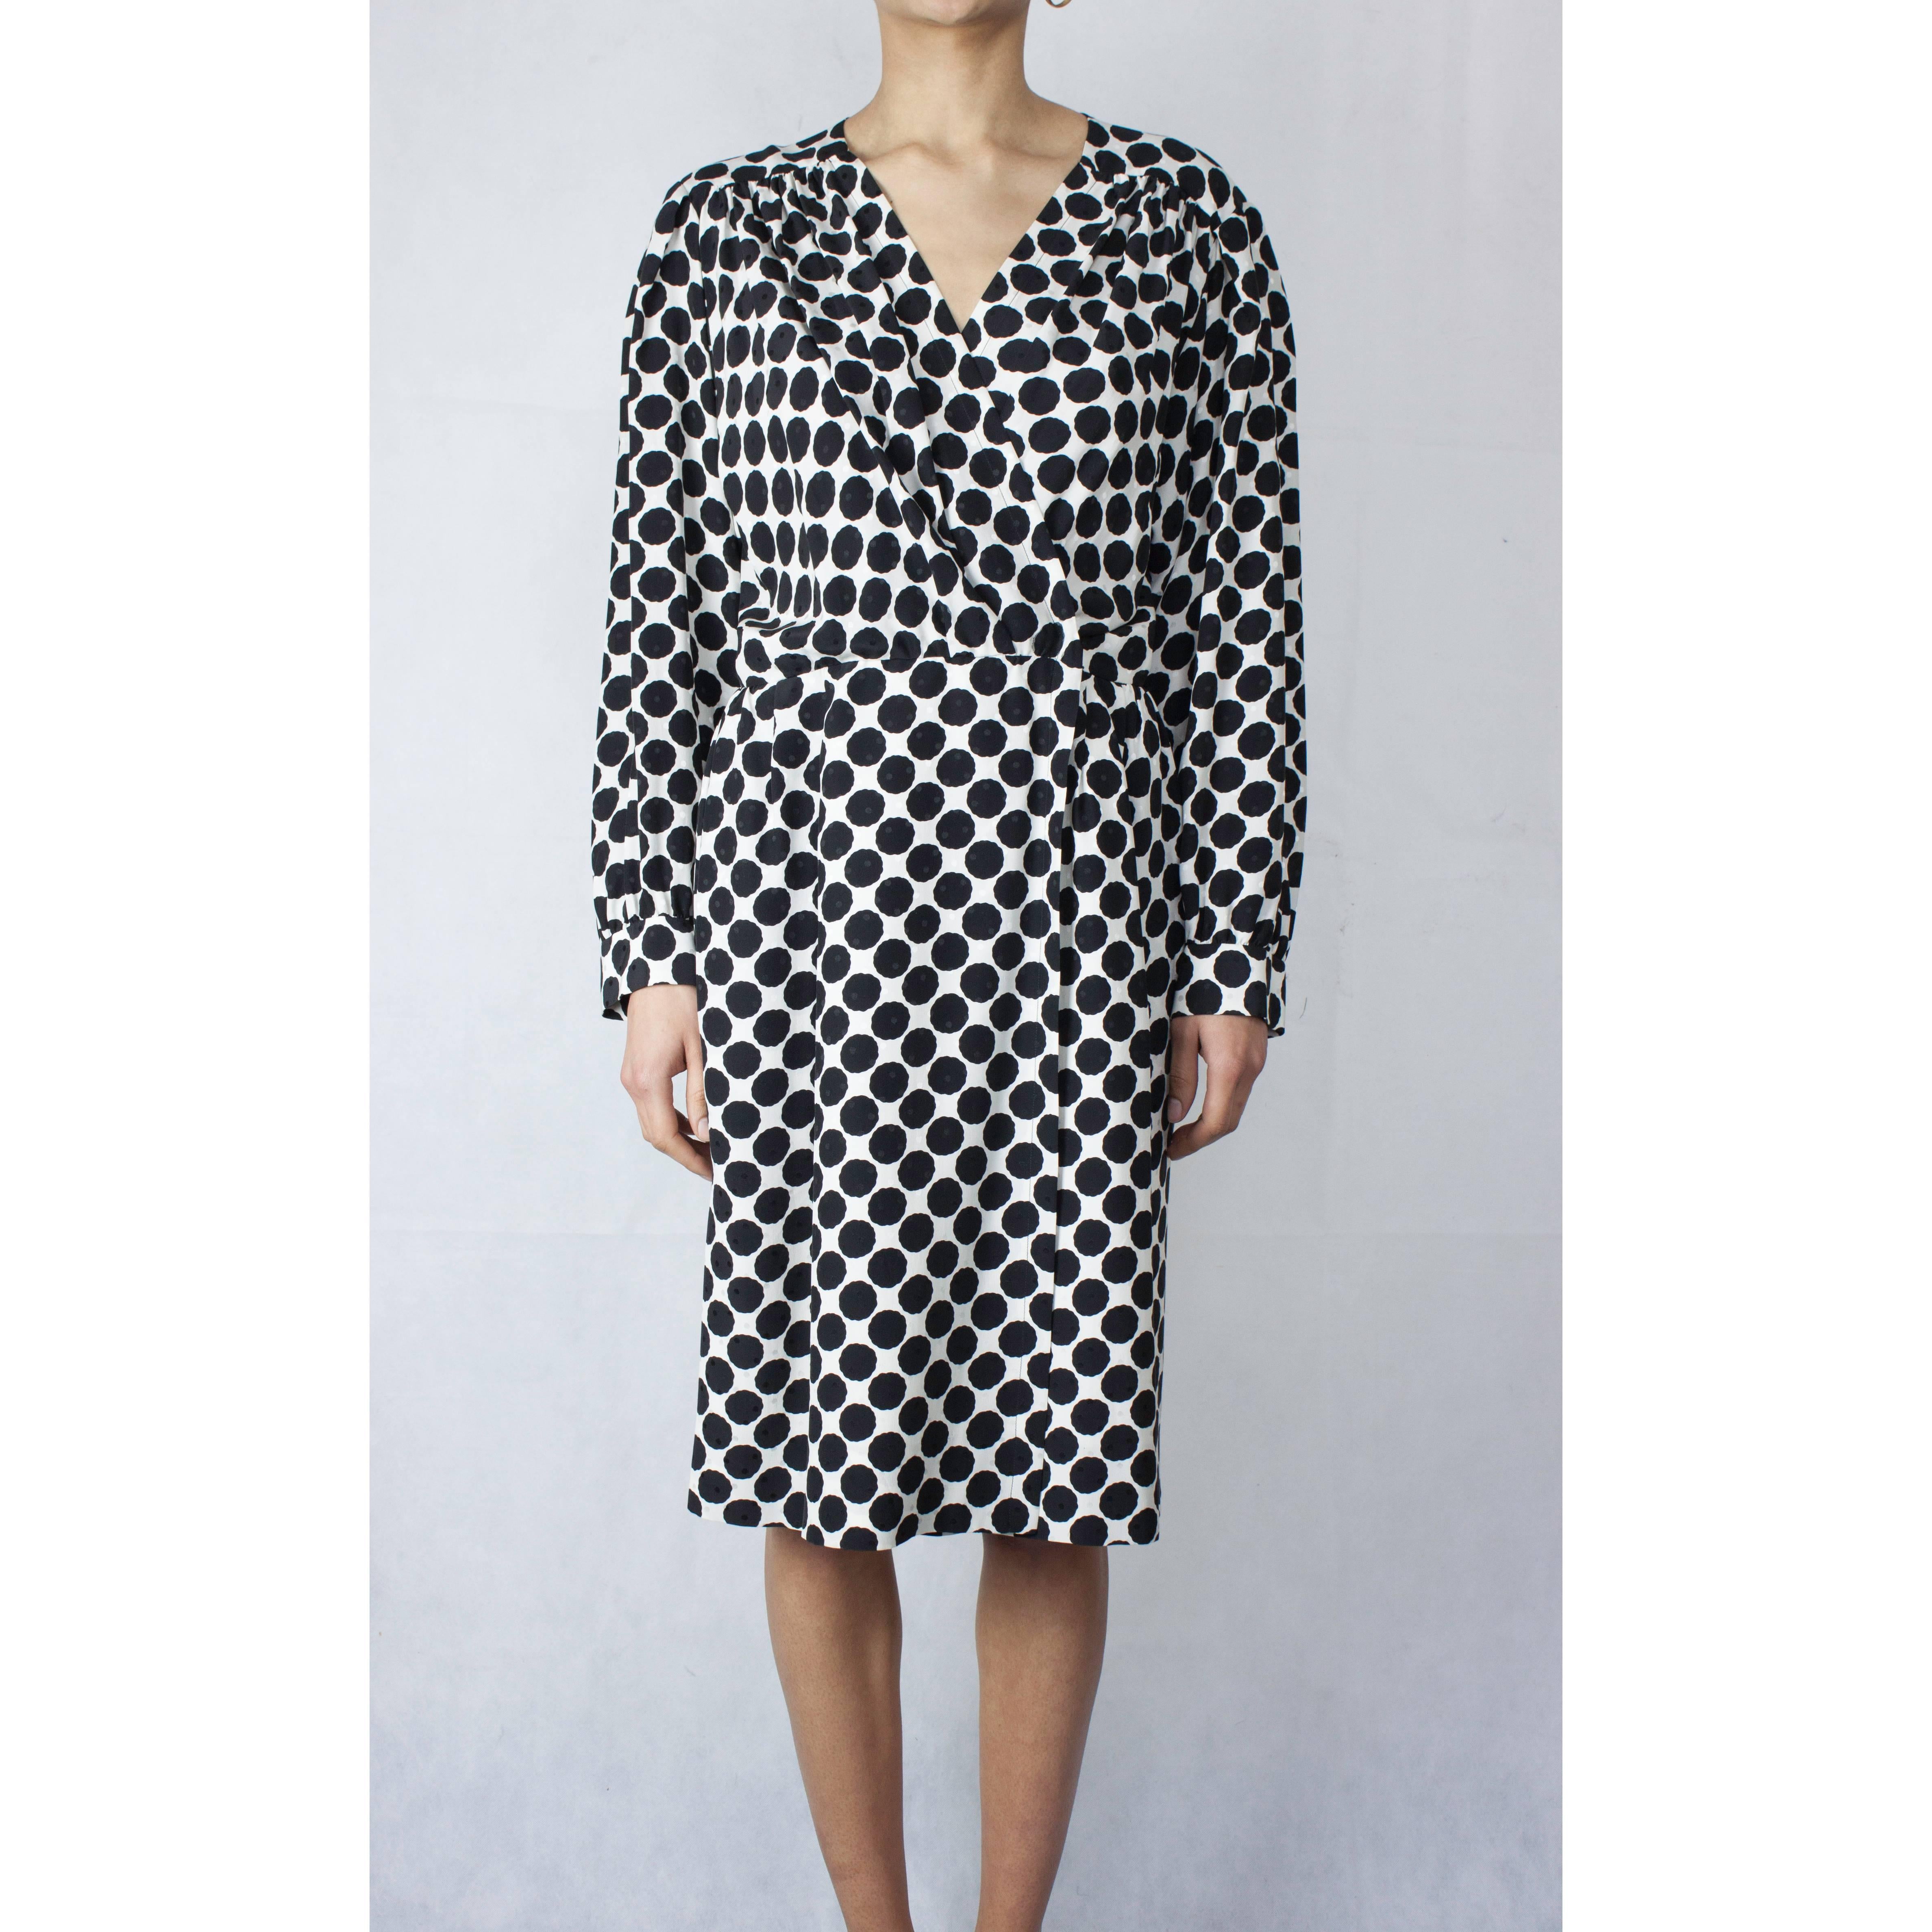 
This elegance and feminine Saint Laurent dress is constructed from embossed silk dress with black polka dots on white background. Featuring a V-neckline with gathered shoulders and long sleeves with barrel sleeves. Two large darts adorn the back of